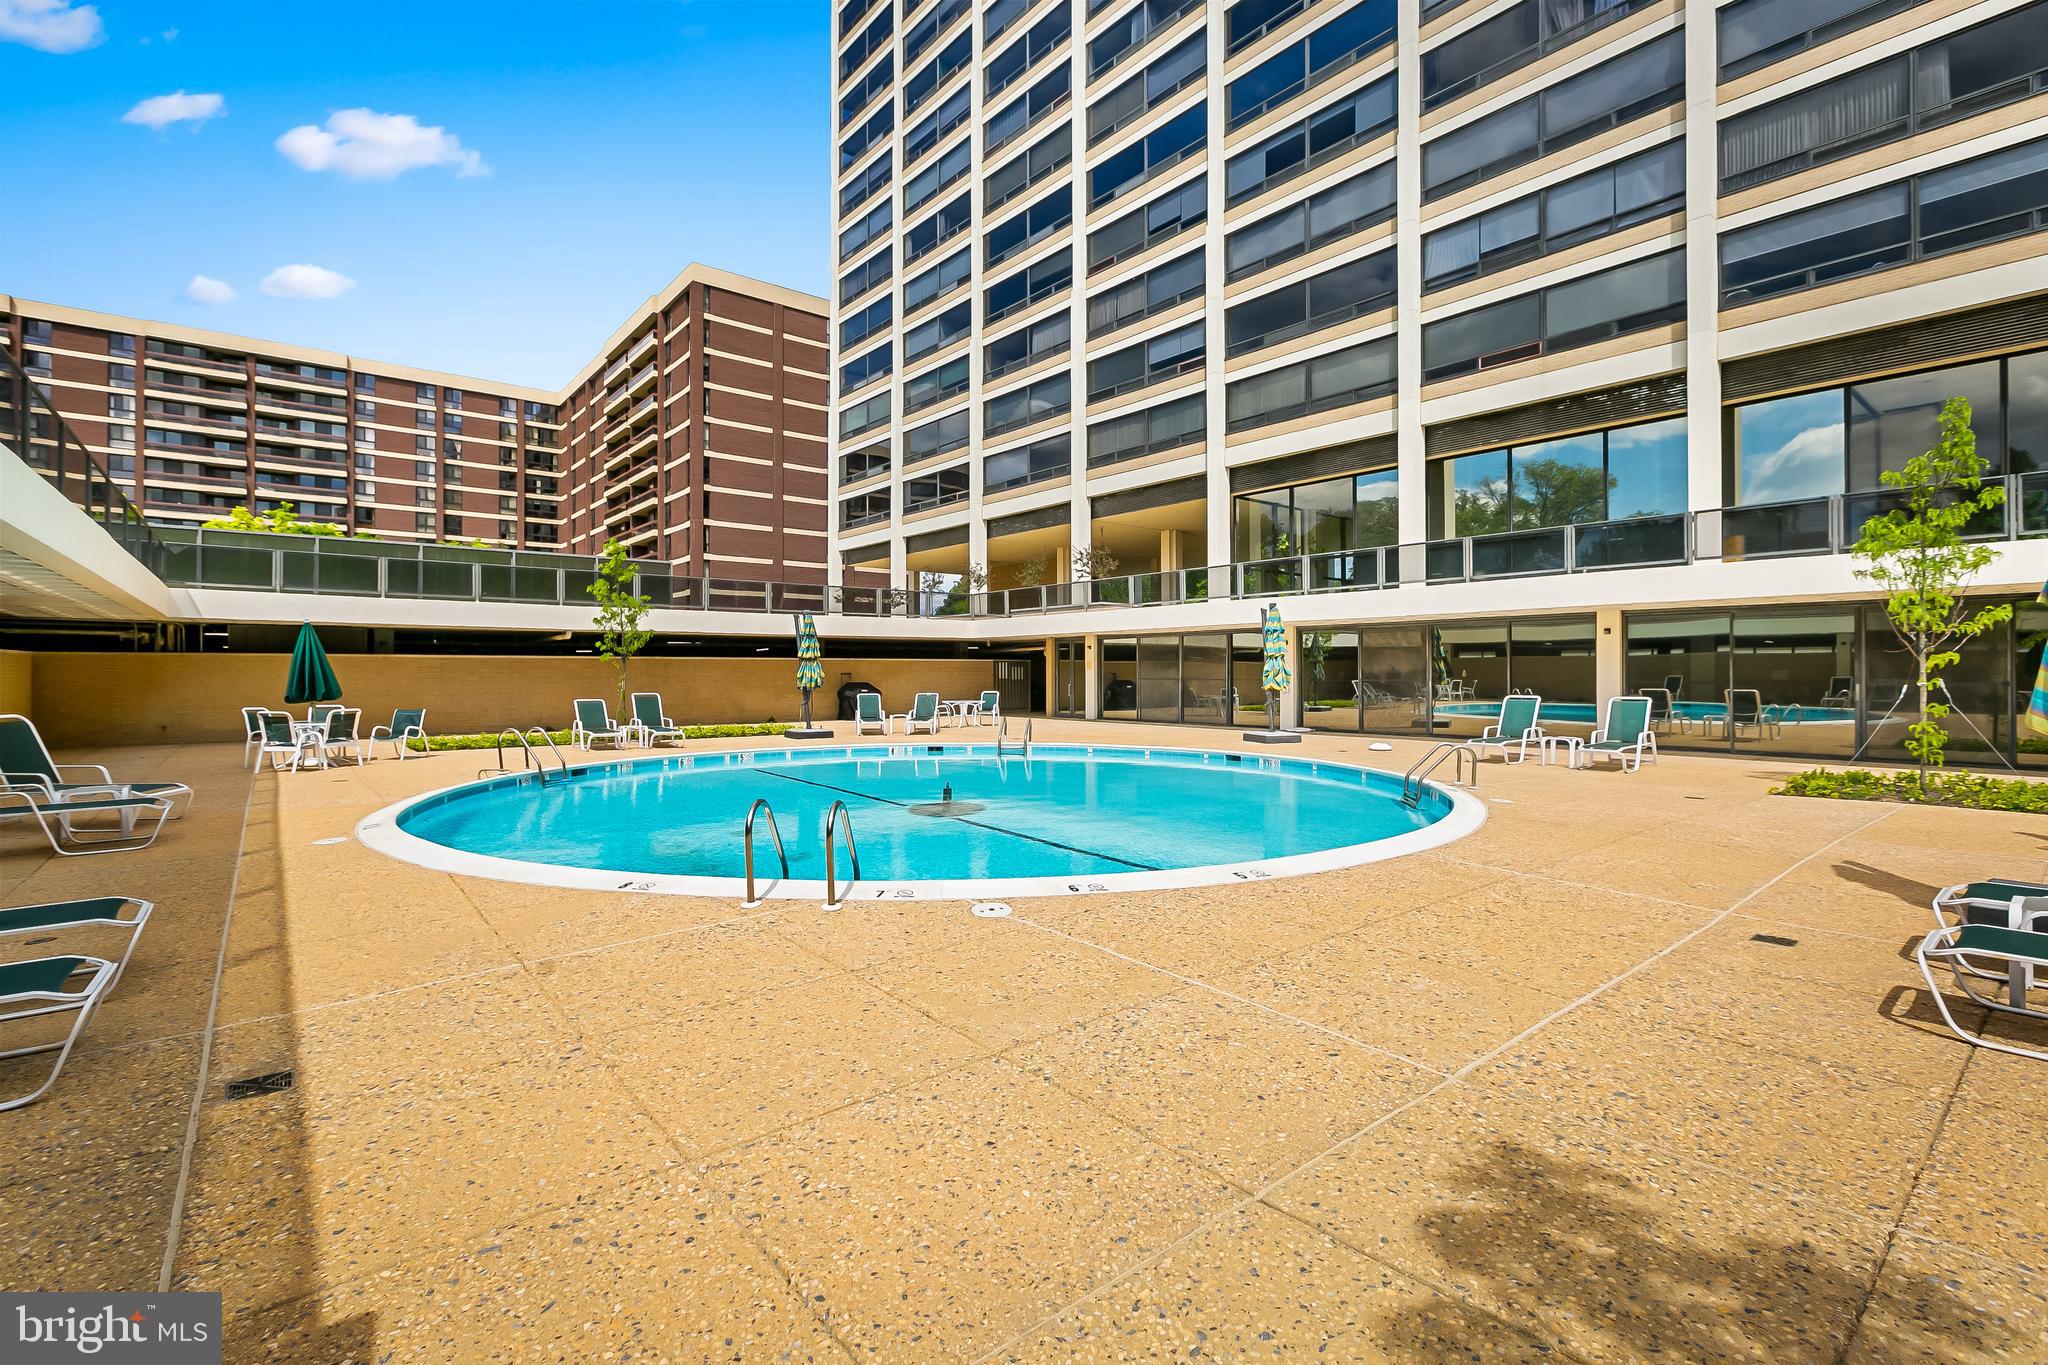 a view of a building with a swimming pool